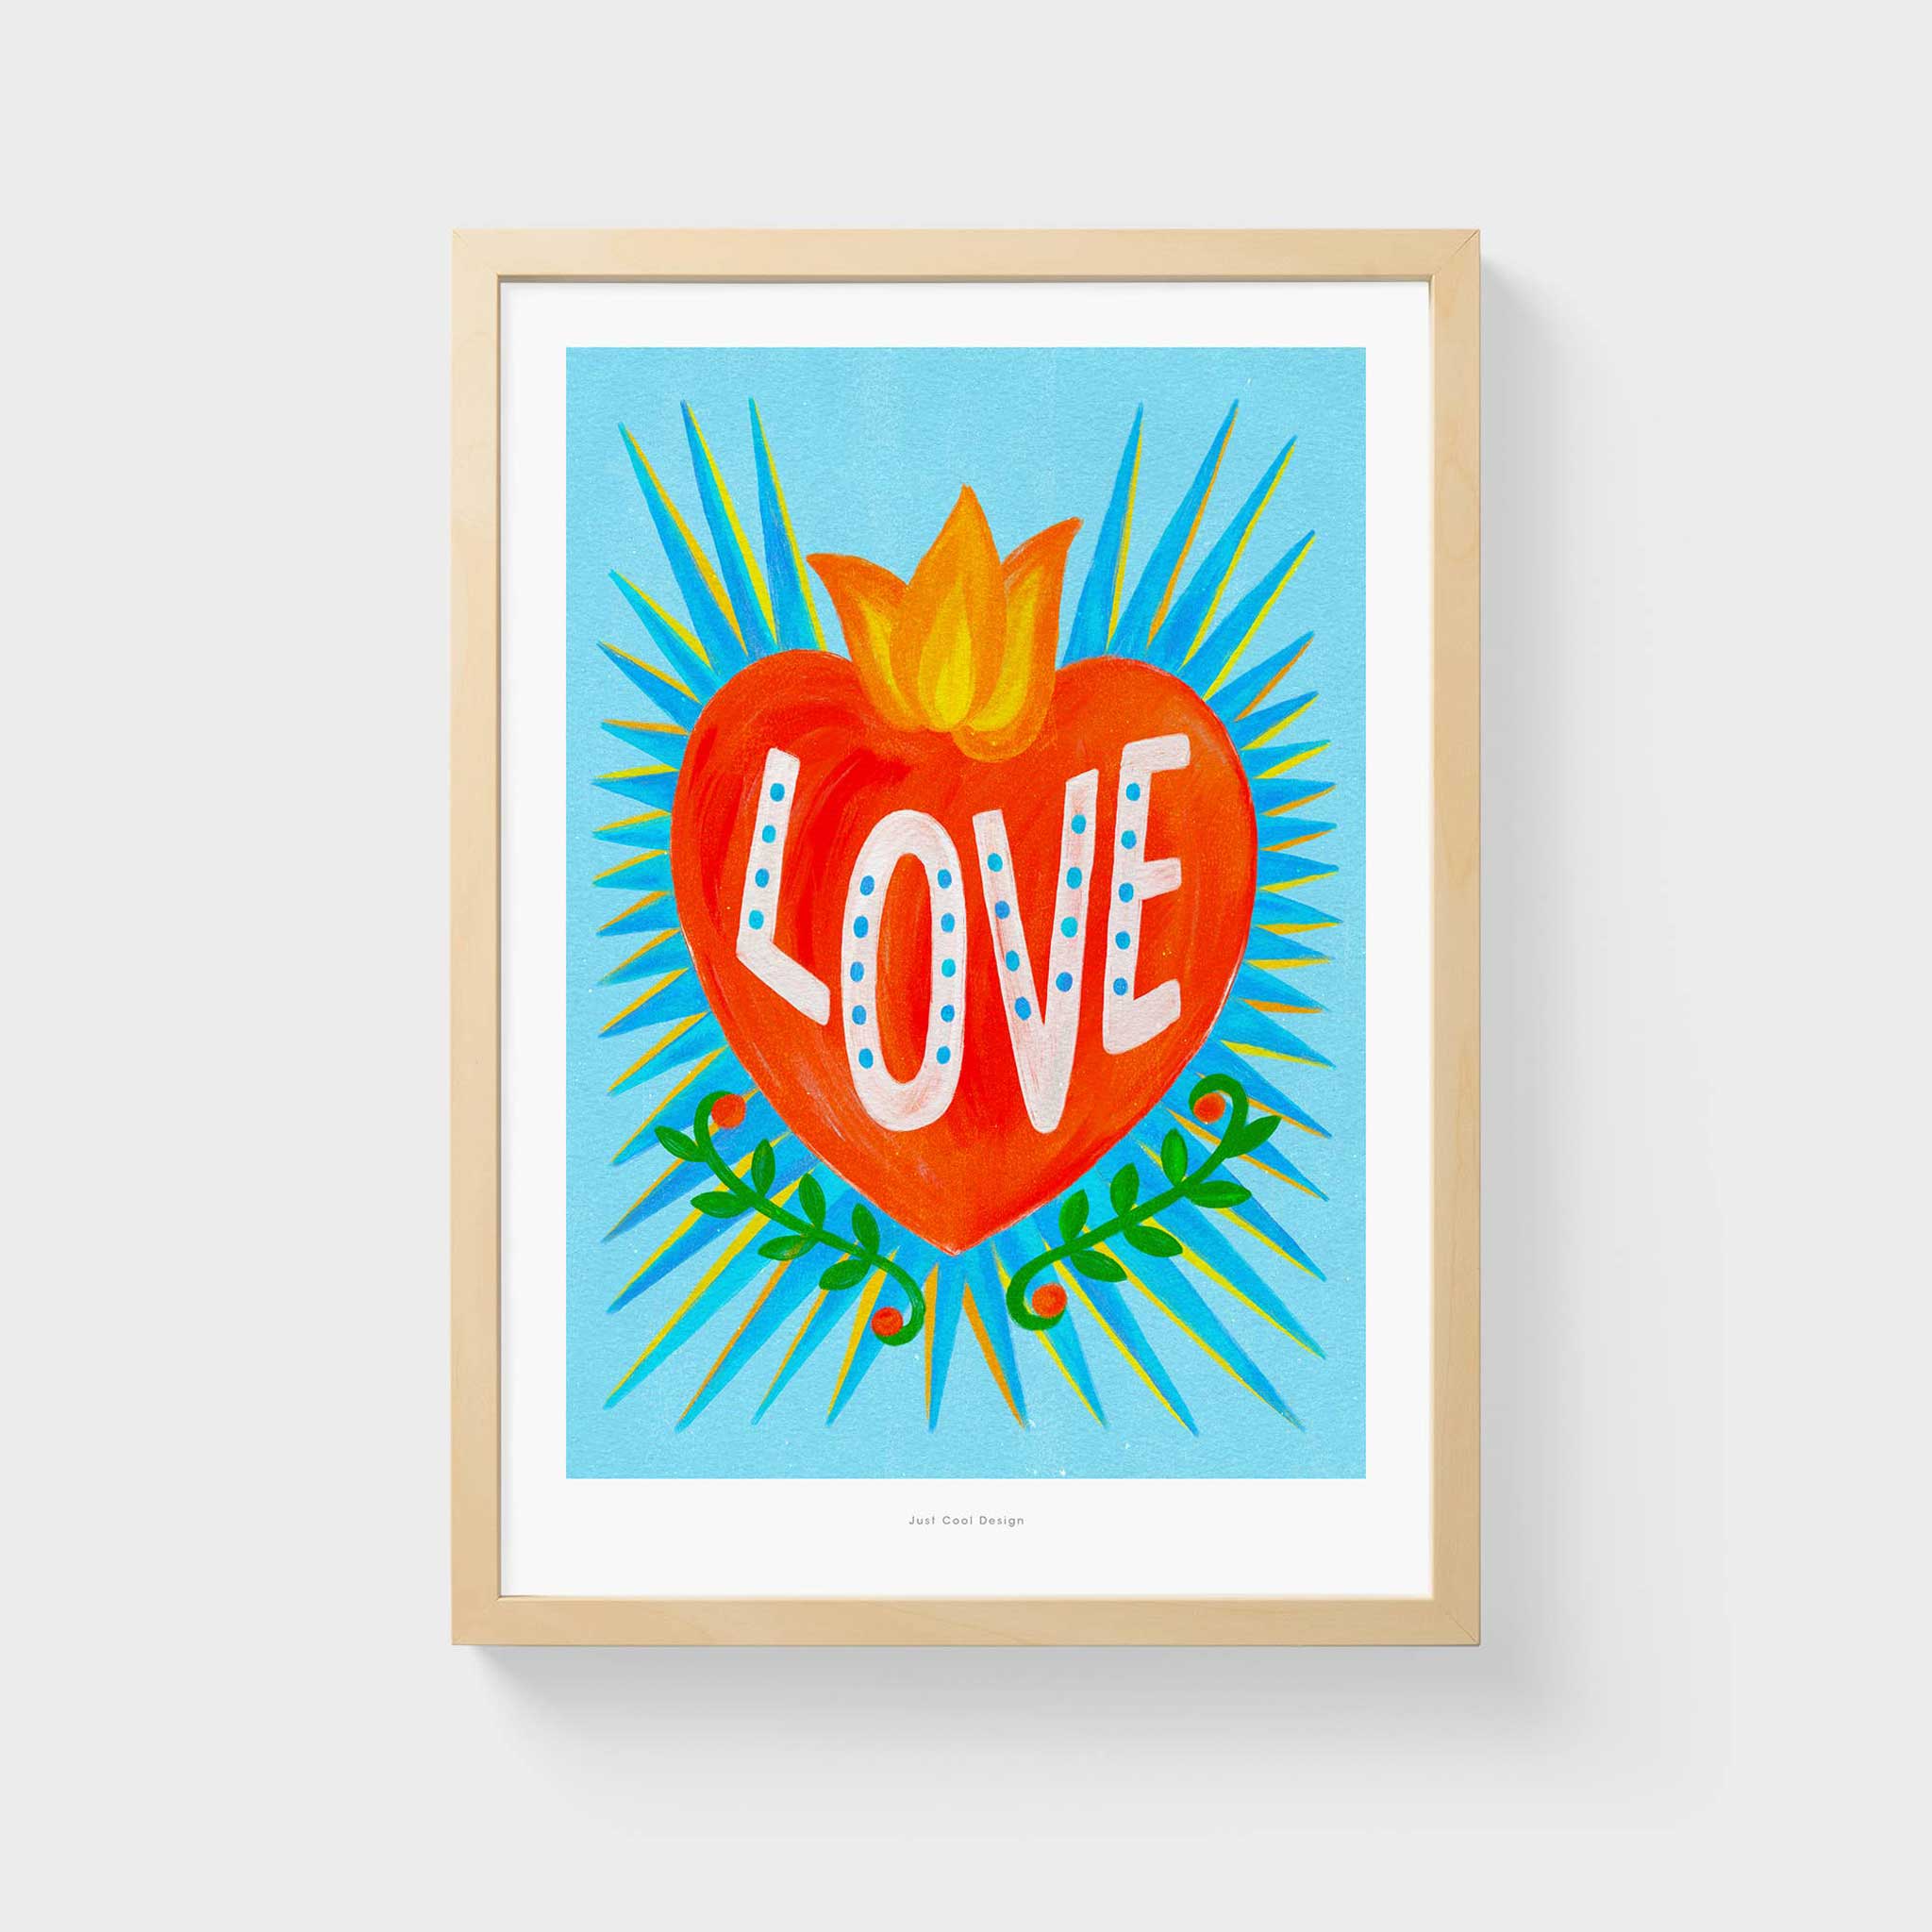 MEXICAN LOVE HEART | Grafik POSTER | A4 Format | Just Another Cool Design